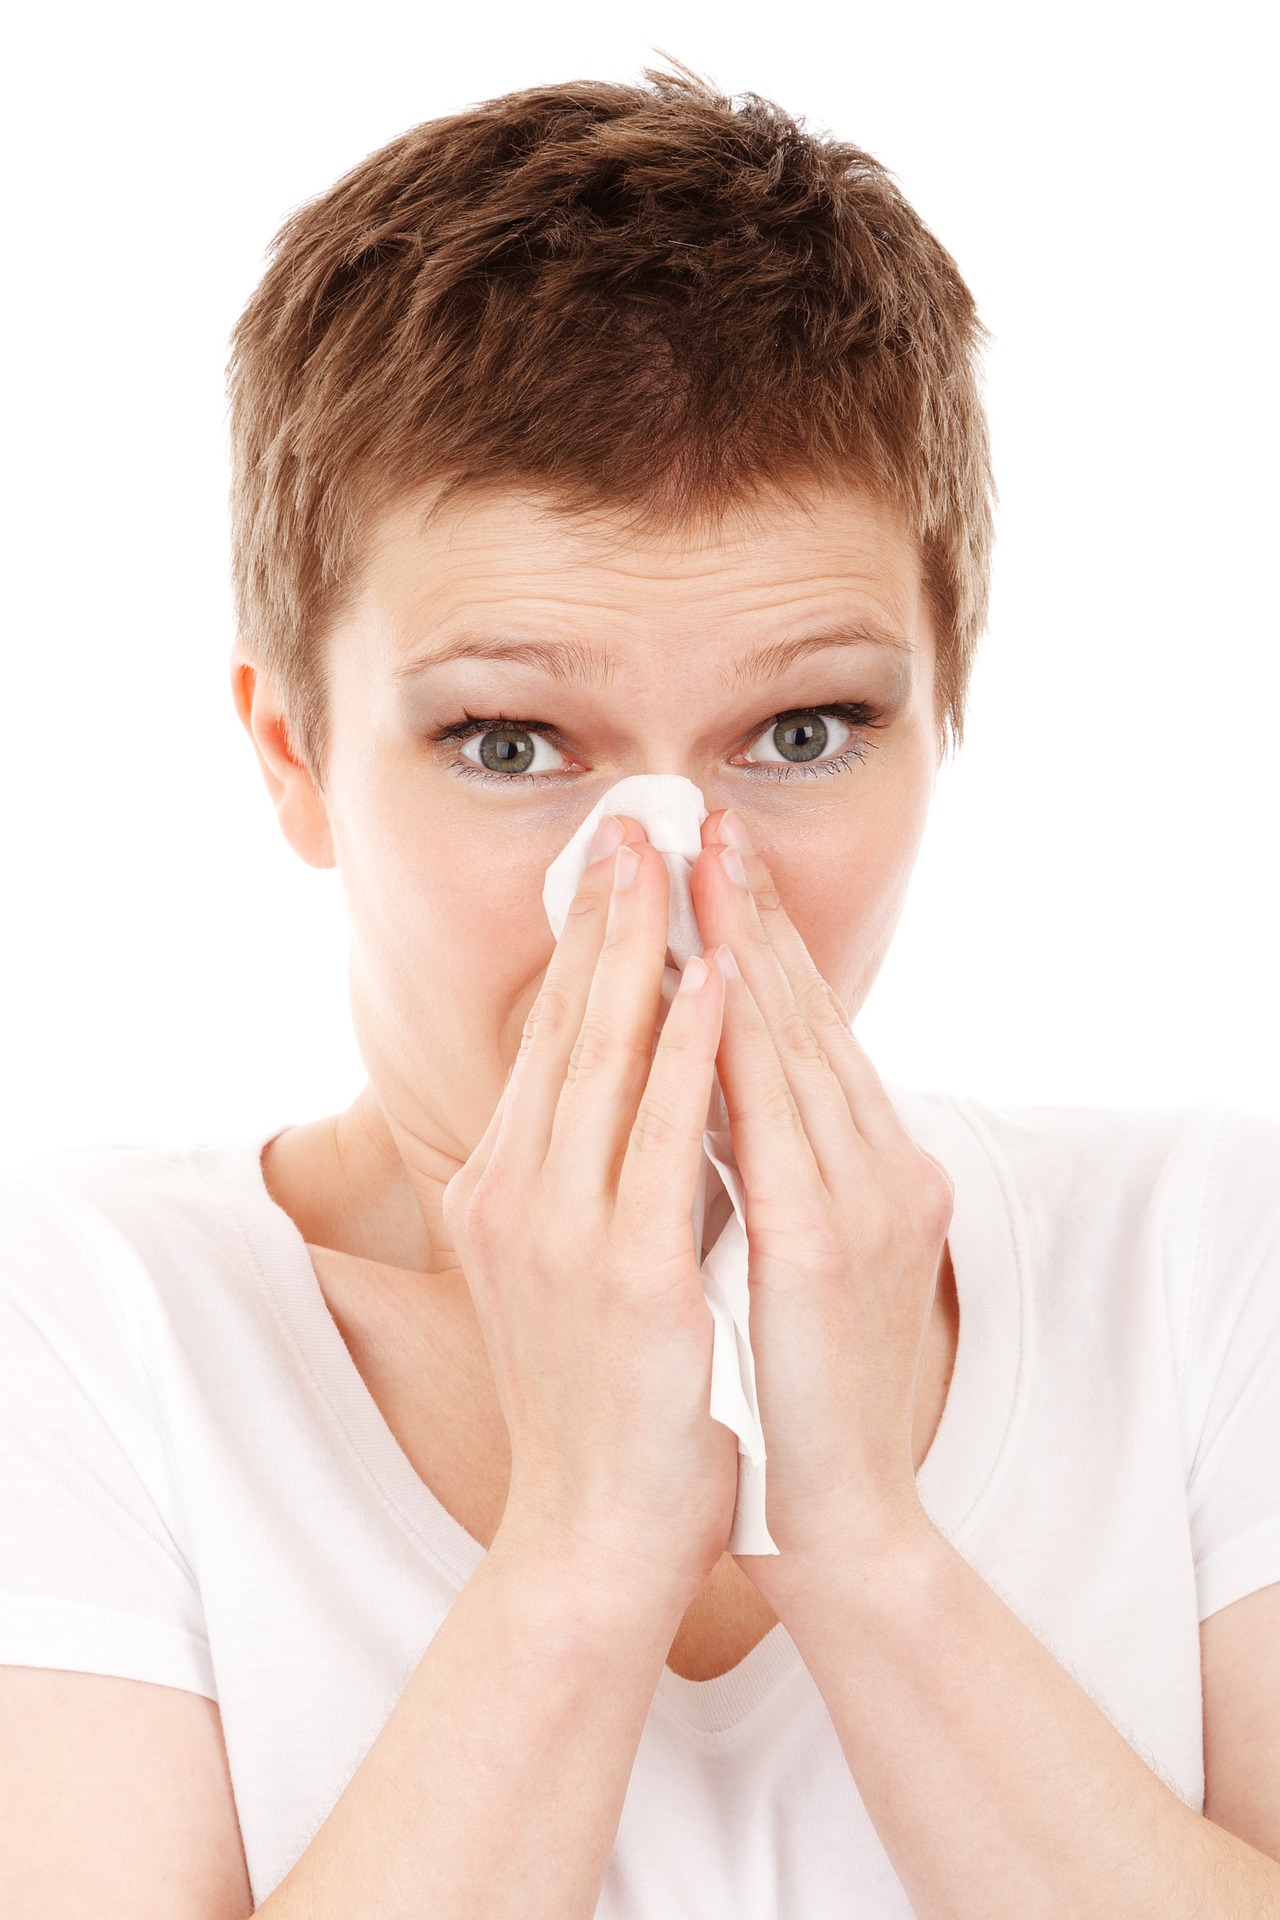 Exploring Homeopathy Treatment For Allergies - How It Works, Benefits And Precautions